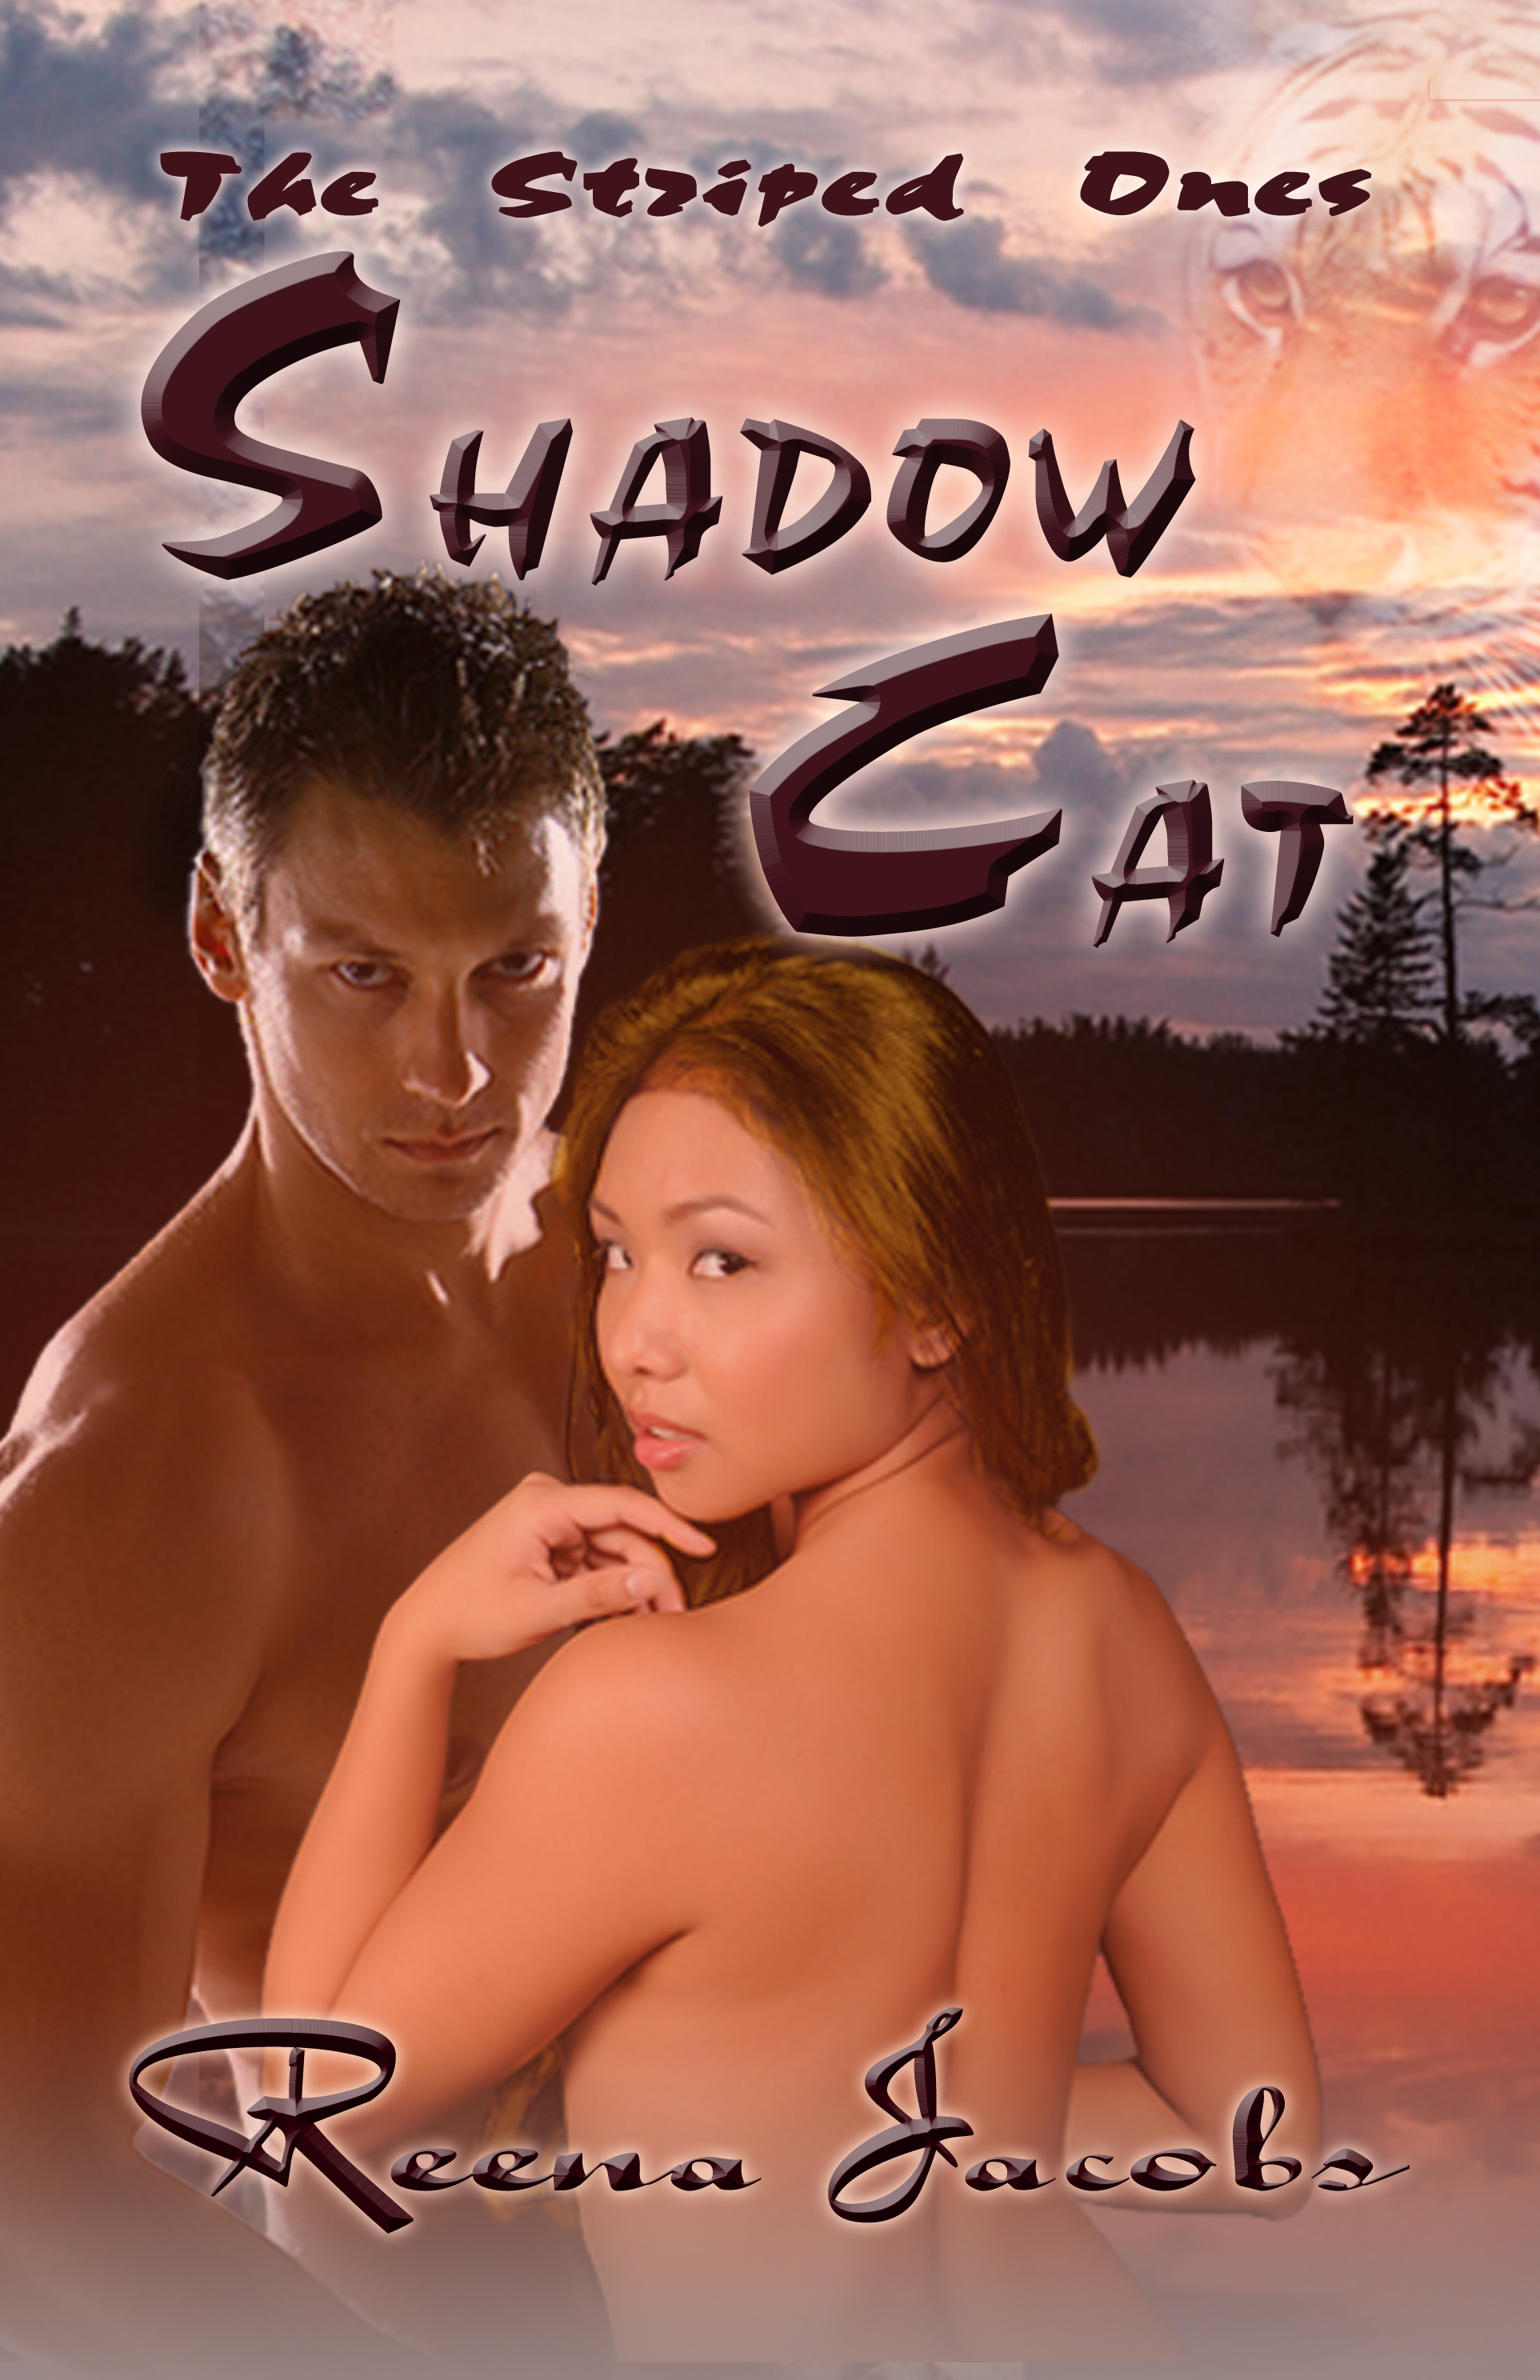 Shadow Cat (The Striped Ones)